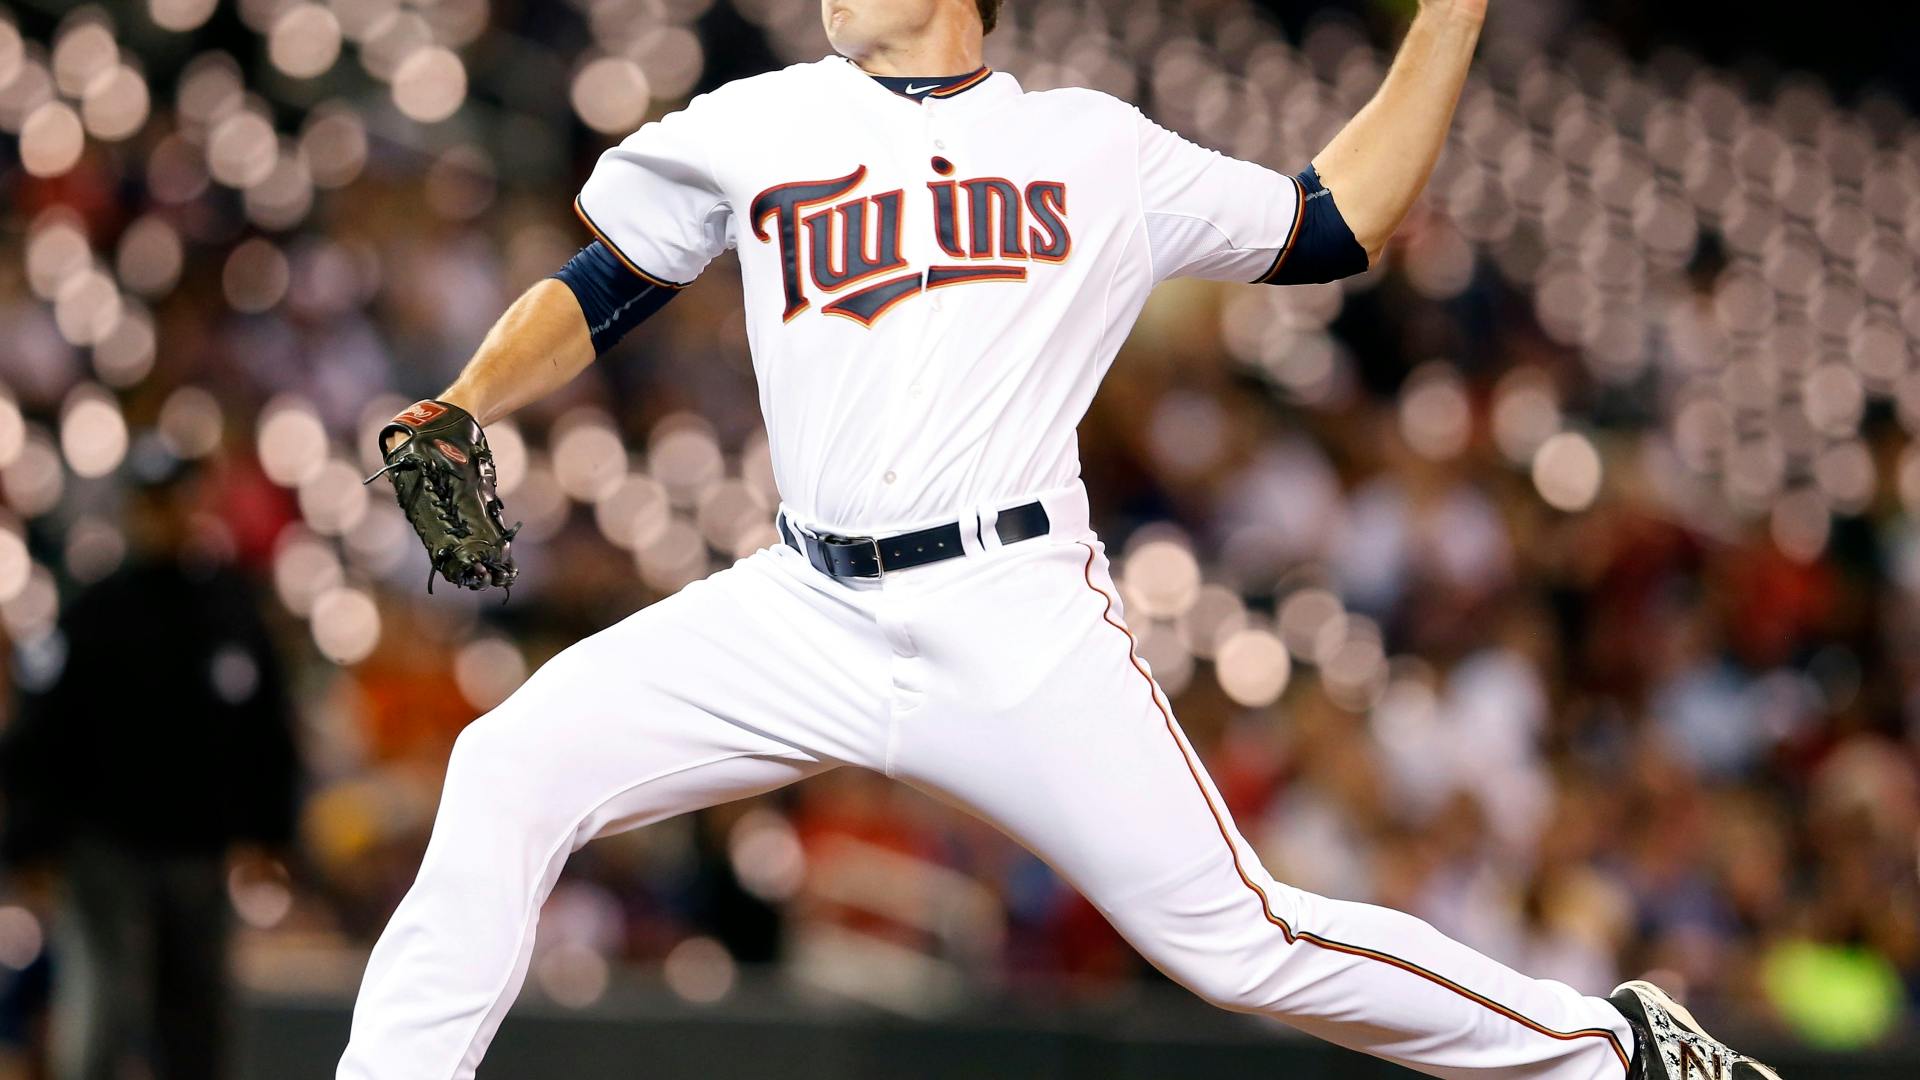 The lefthander was called up as Twins search for answers in the bullpen.